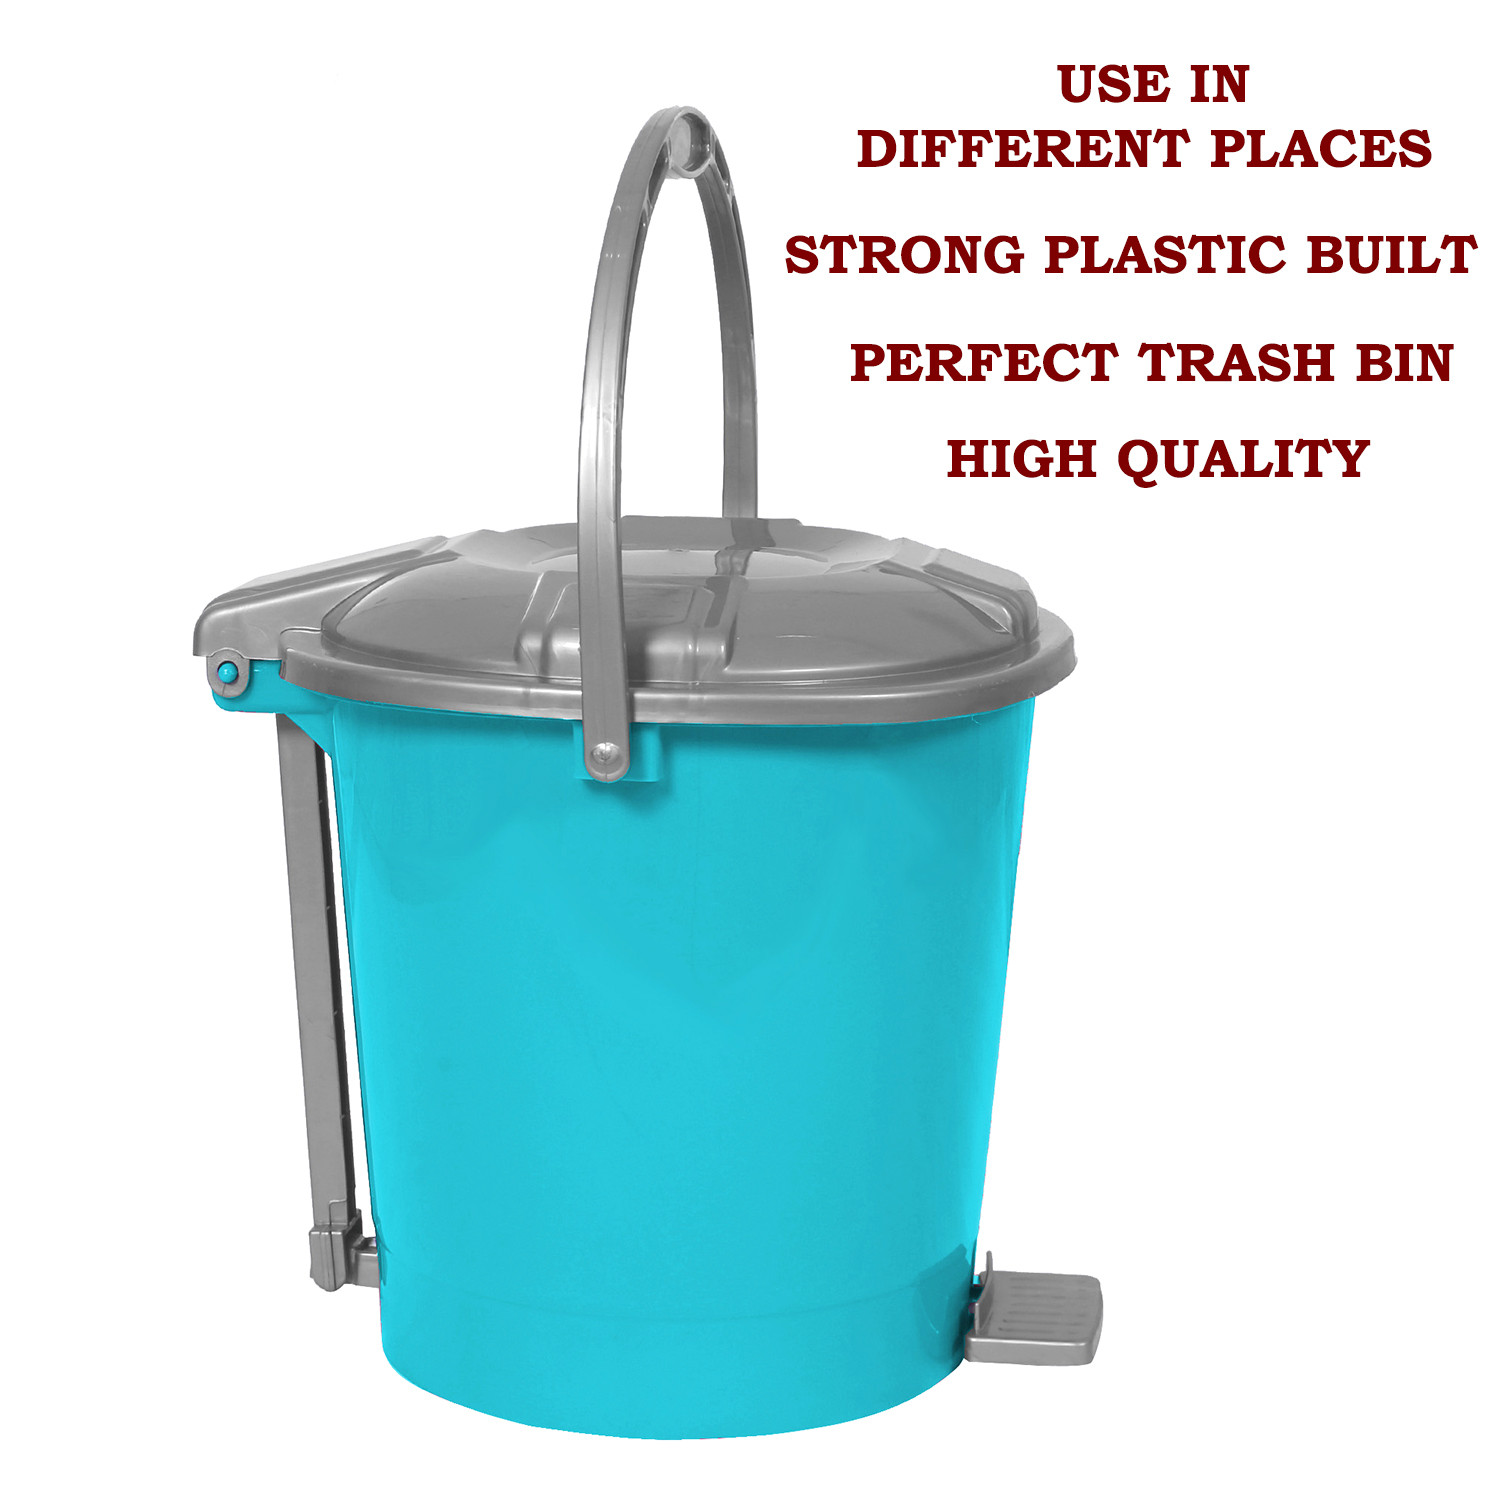 Kuber Industries Durable Plastic Pedal Dustbin|Waste Bin|Trash Can For Kitchen & Home With Handle,10 Litre (Sky Blue)